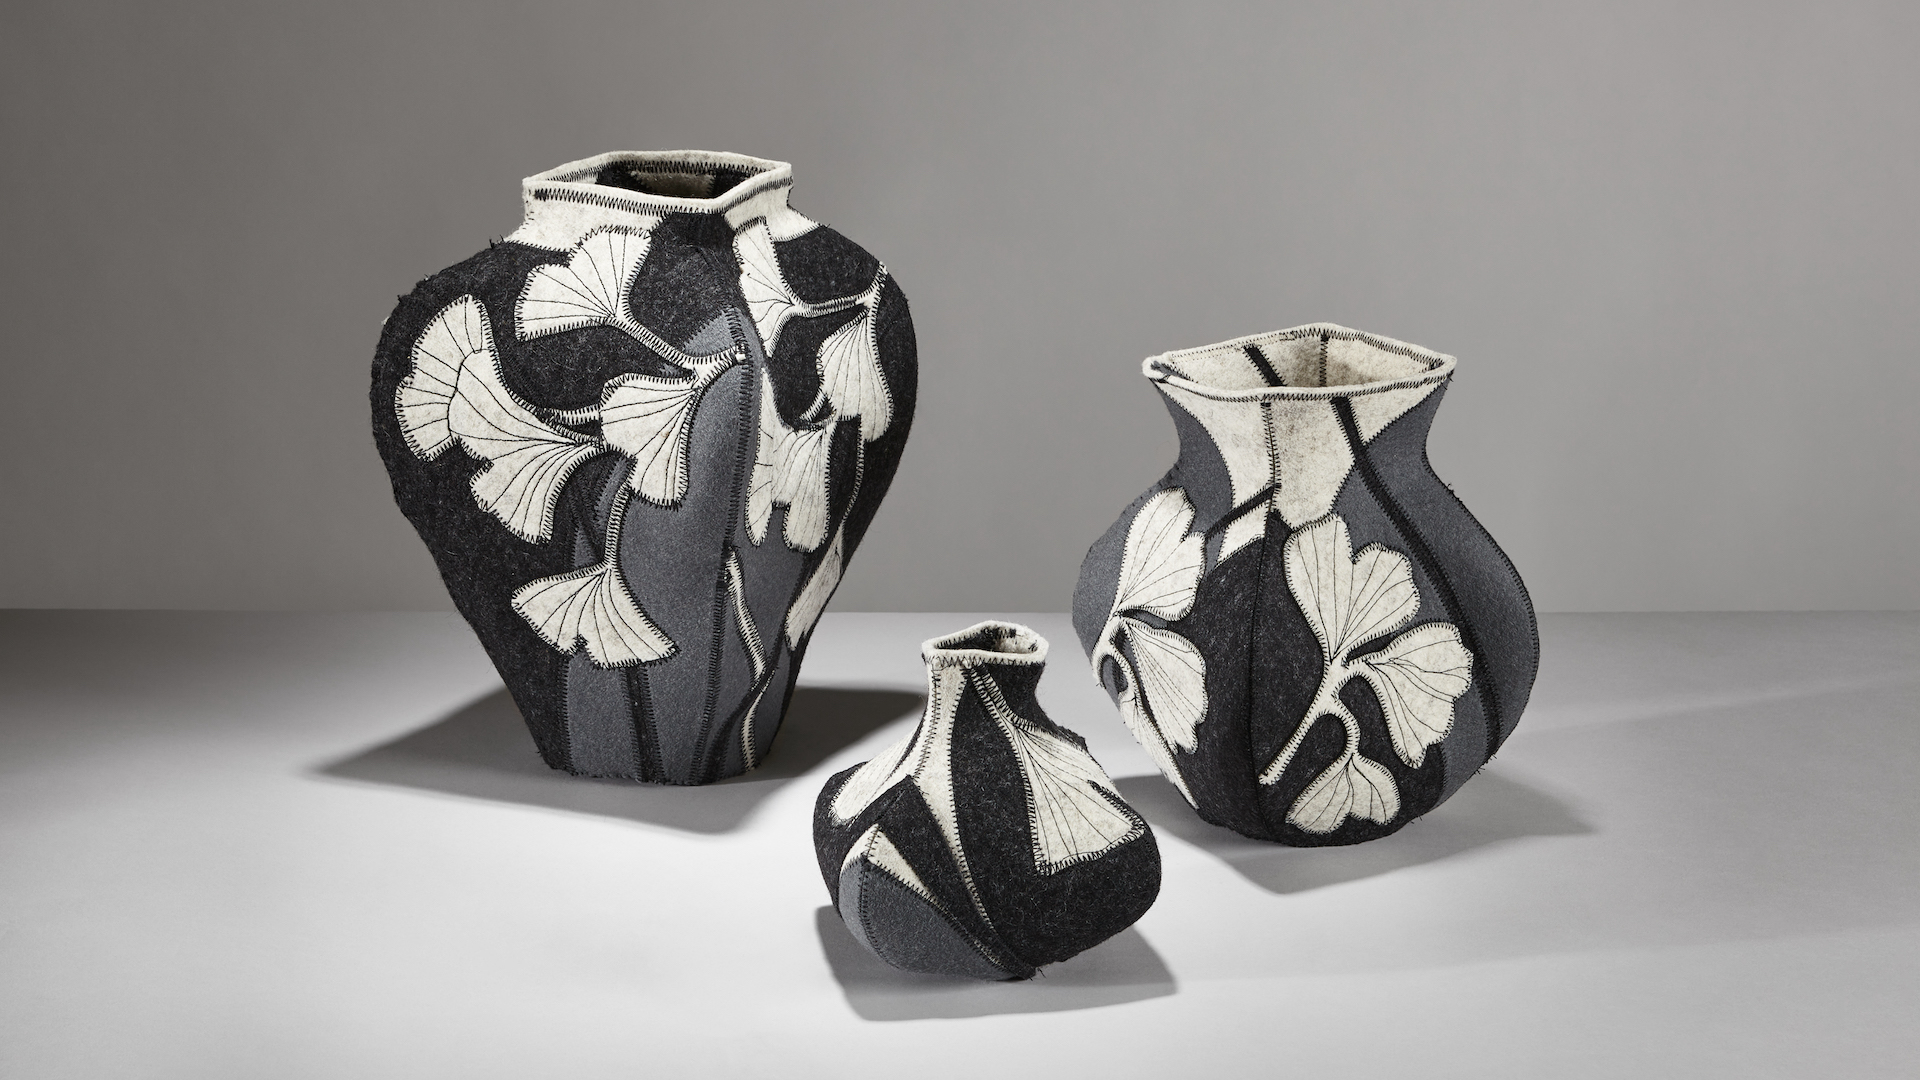 trio of sewn felt vases in shades of gray with a ginkgo leaf pattern by artist molly zimmer